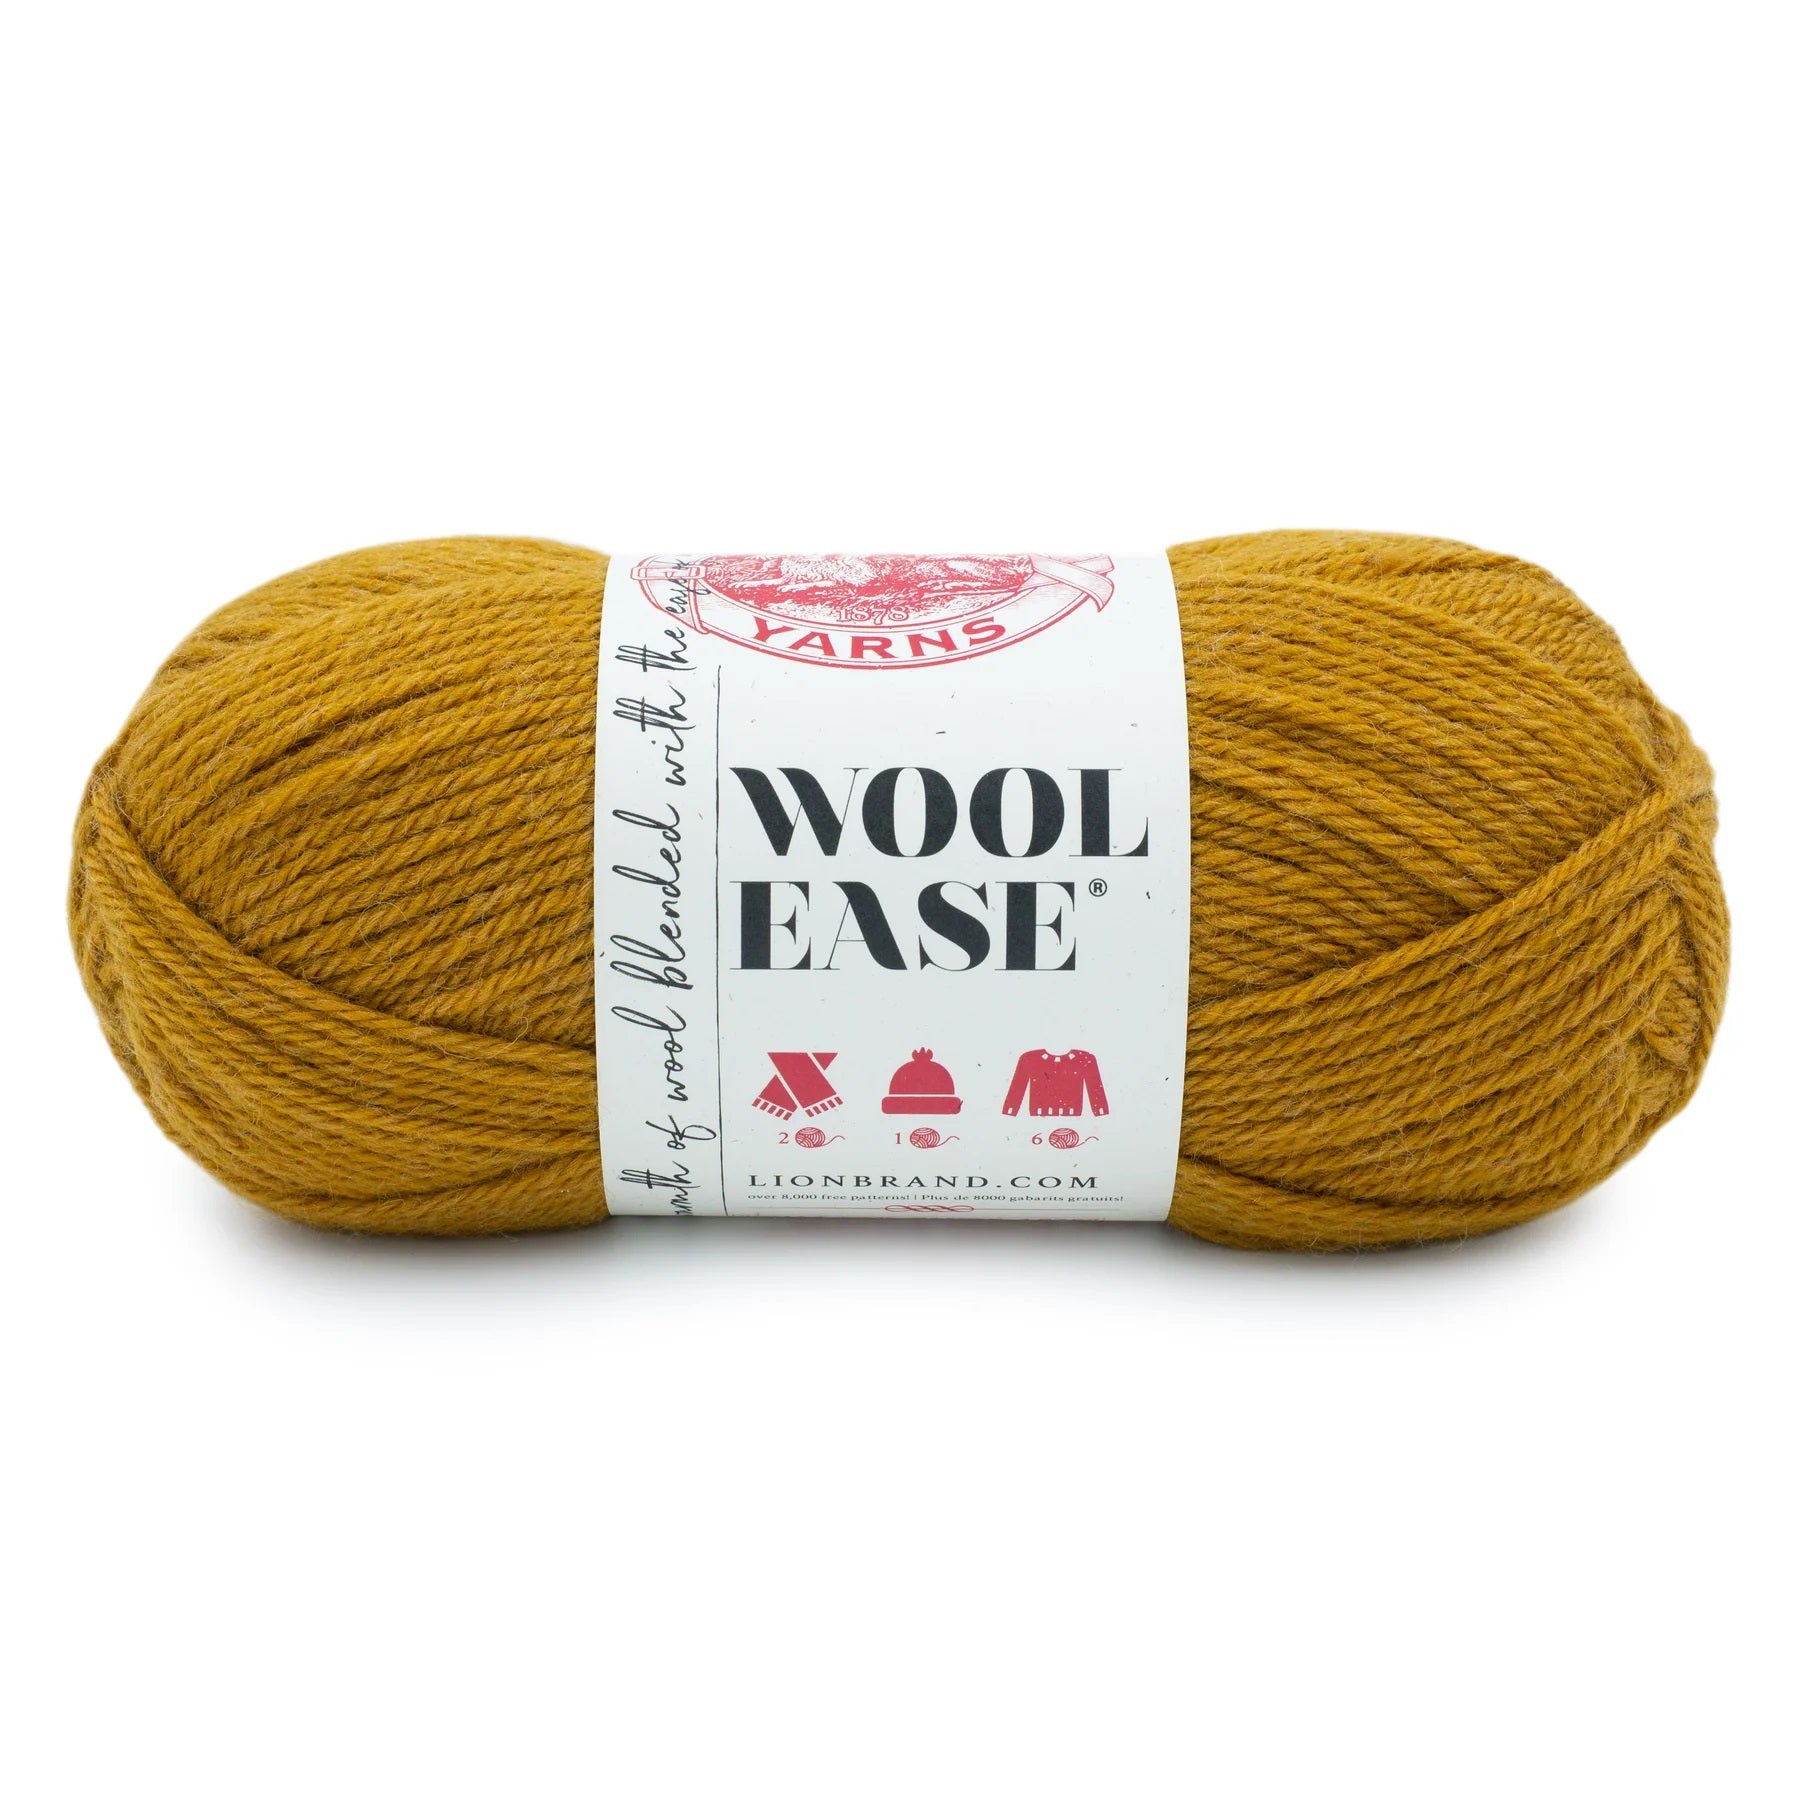  Lion Brand Wool Ease Natural Heather 620-098 (6-Skeins - Same  Dye Lot) Worsted Medium #4 Acrylic, Wool Yarn for Crocheting and Knitting -  Bundle with 1 Artsiga Crafts Project Bag